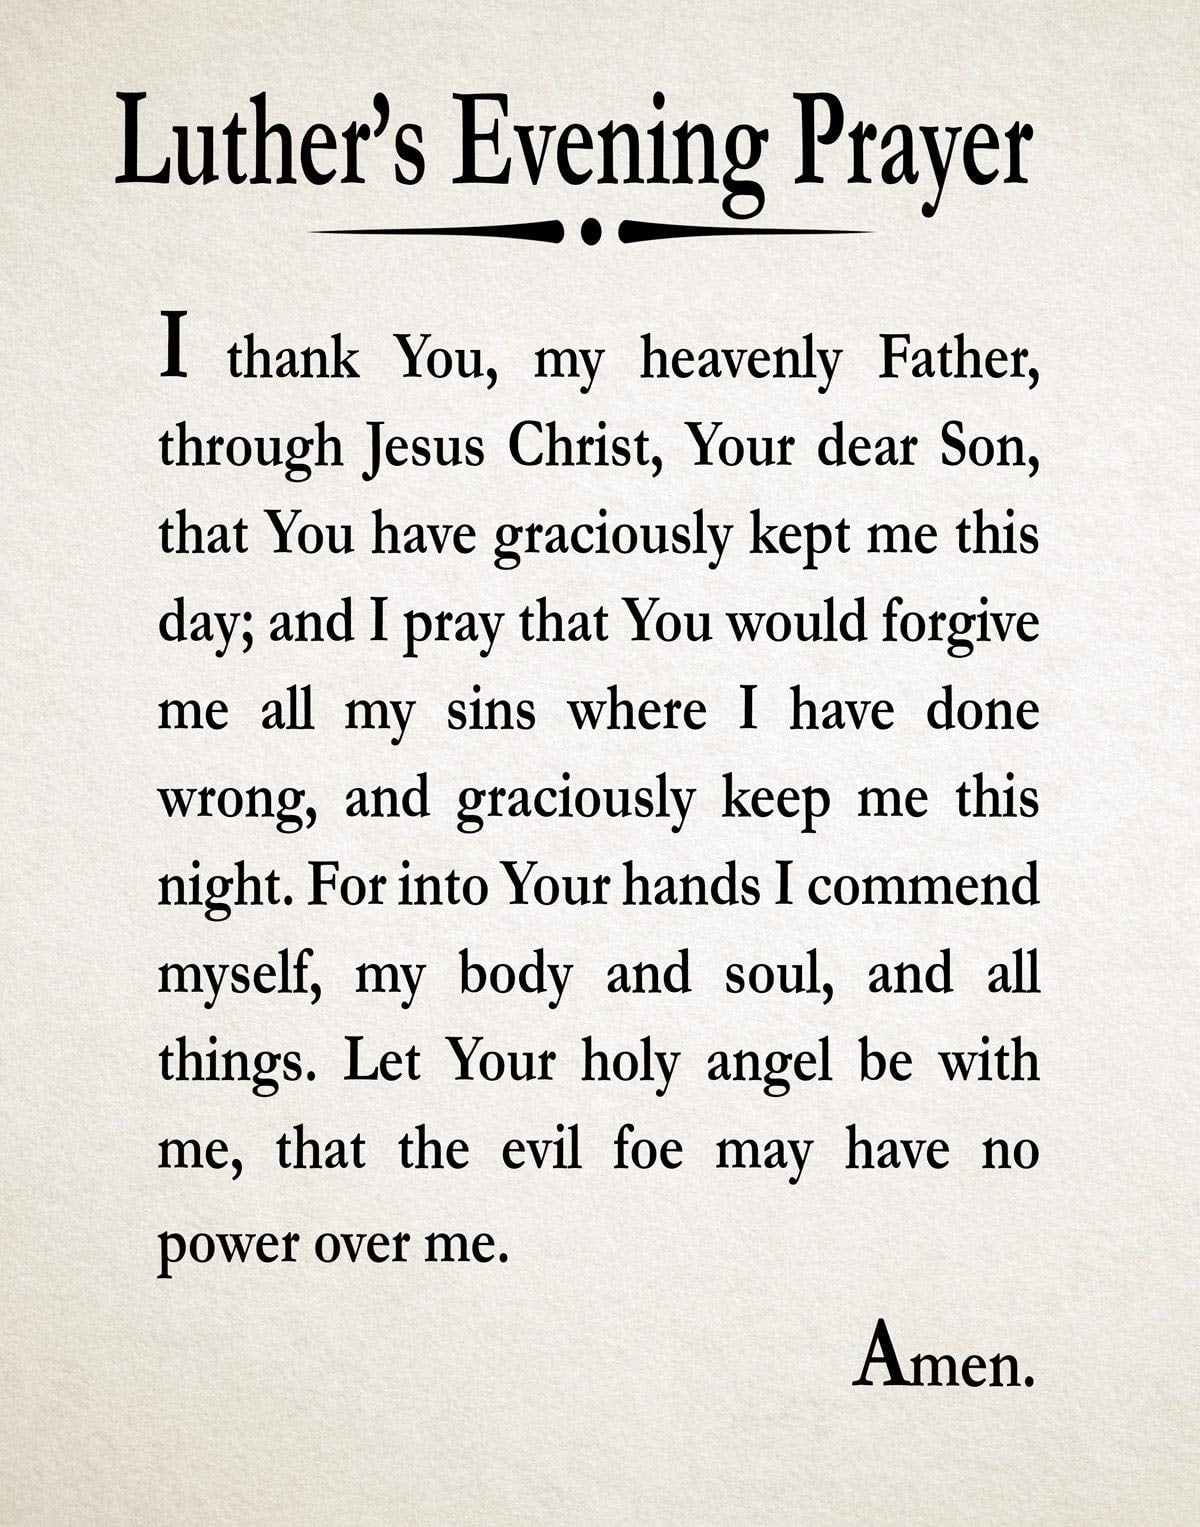 Amazon Luther s Evening Prayer Print Daily Christian Prayer Art 23 4 X 33 1 A1 Ivory Posters Prints